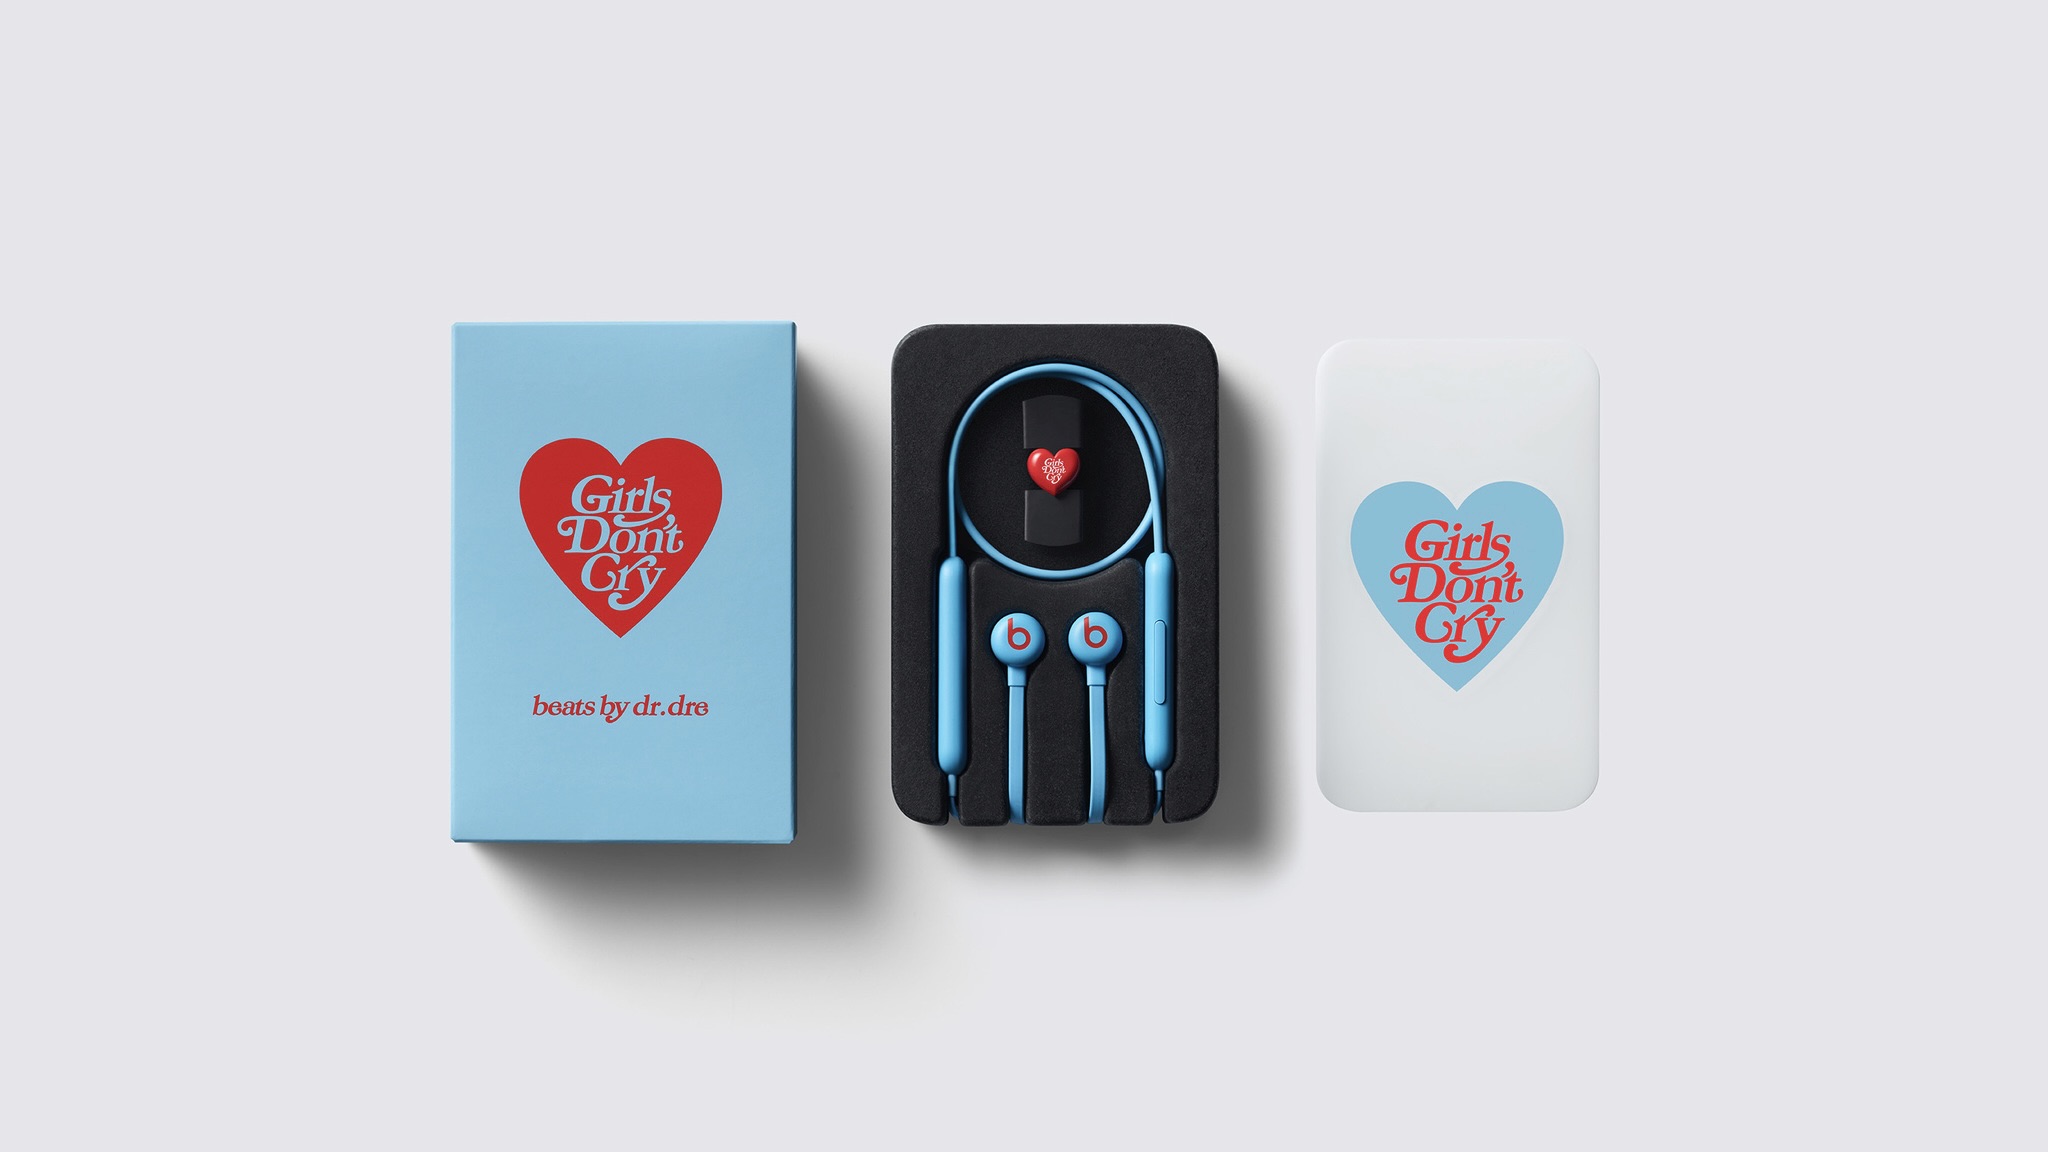 Girls Don't Cry × Beats by Dr.Dre Flex | eclipseseal.com